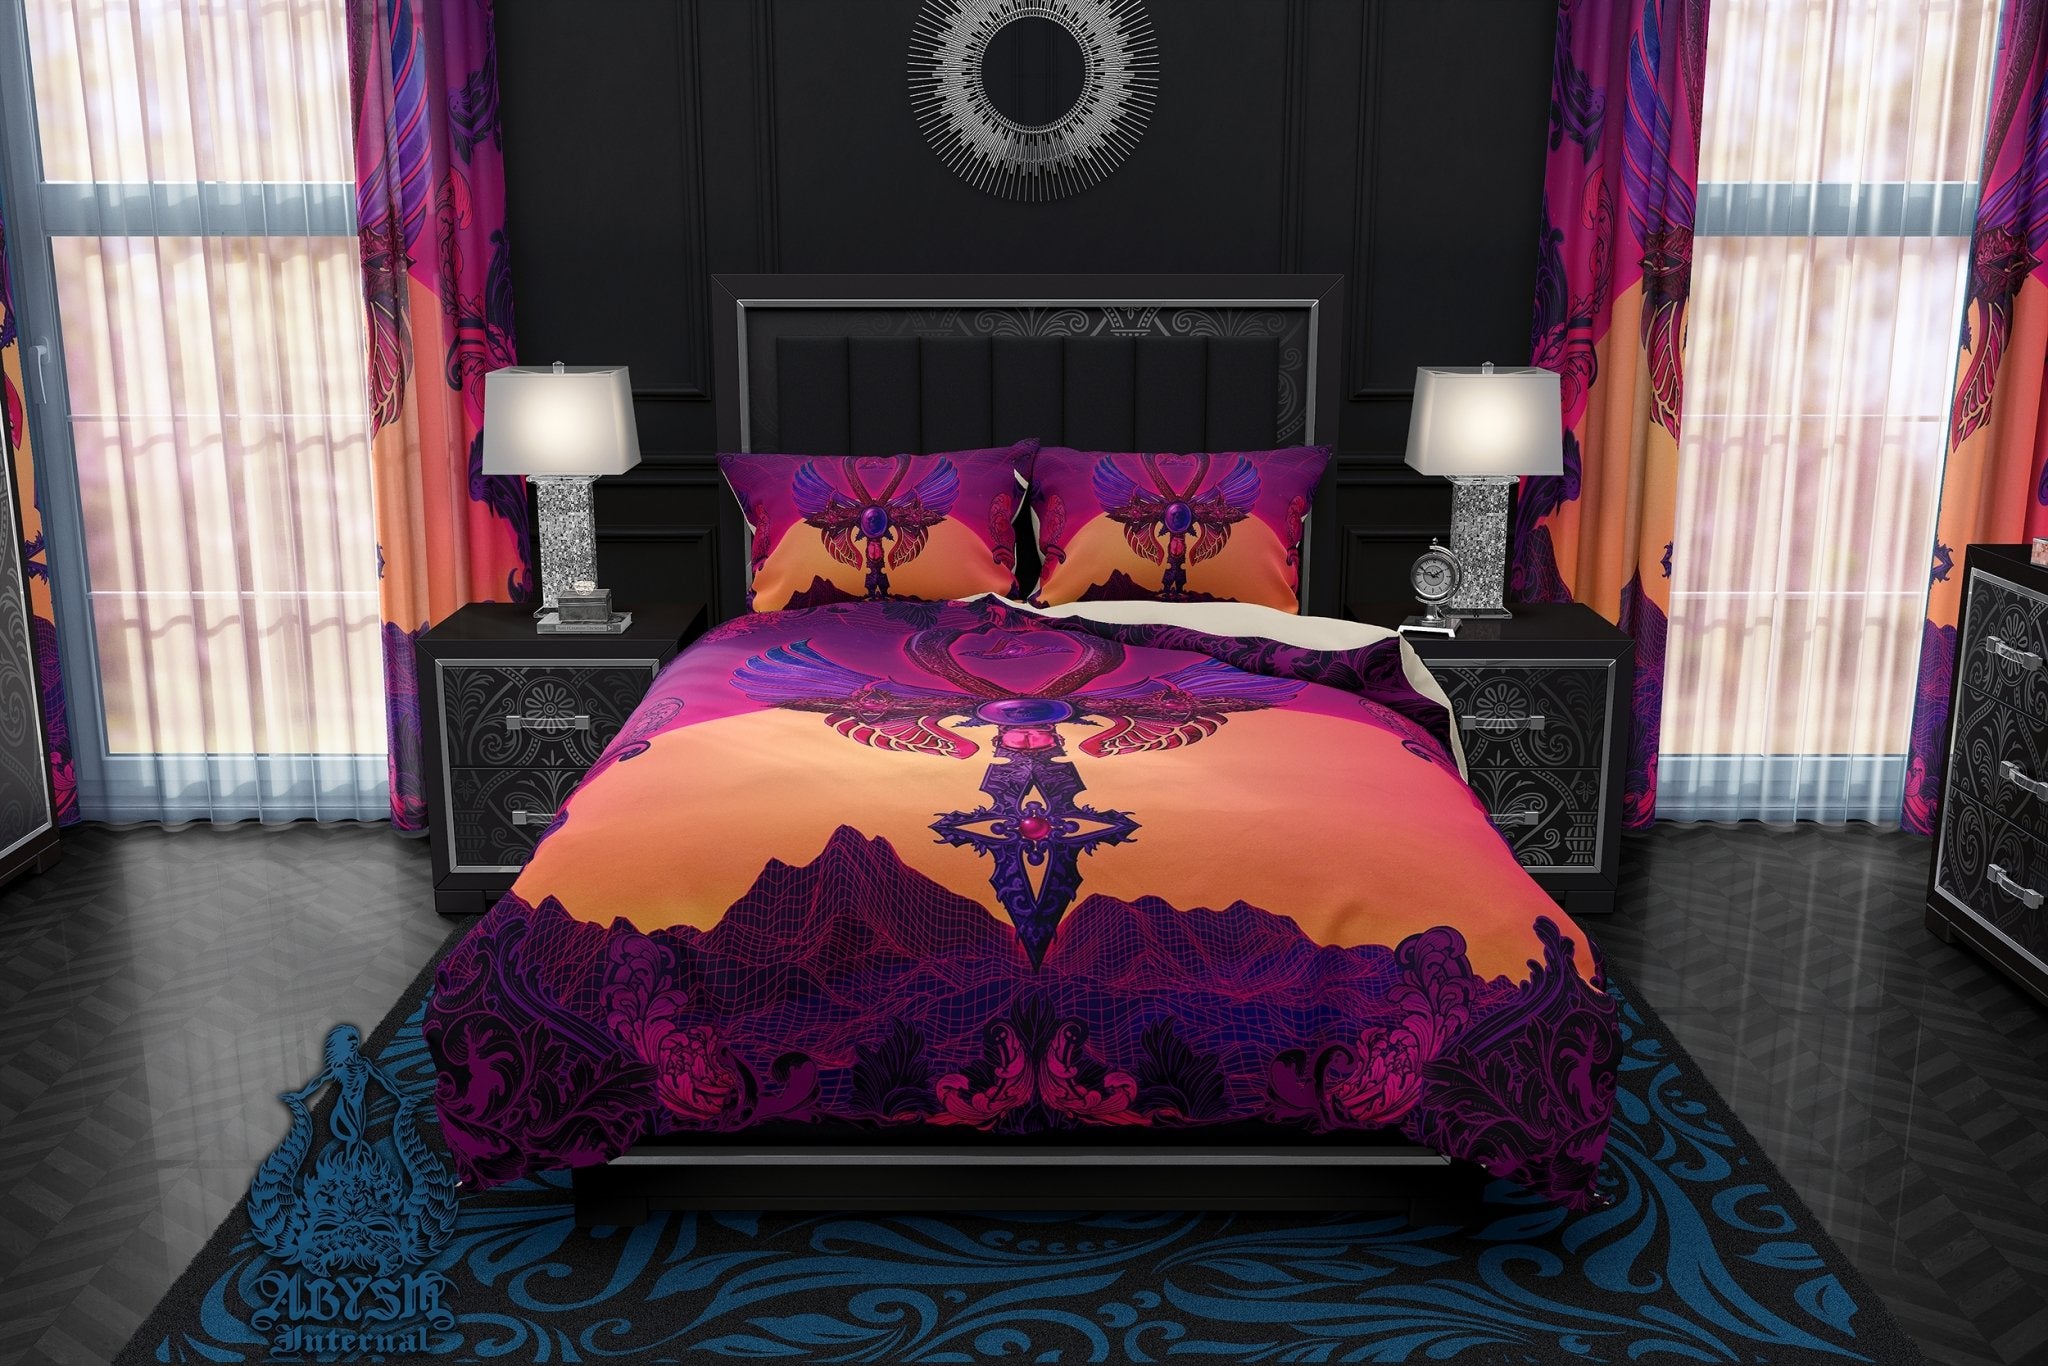 Vaporwave Bedding Set, Comforter and Duvet, Synthwave Bed Cover and Retrowave Bedroom Decor, King, Queen and Twin Size, Psychedelic 80s Gamer Room Art - Ankh, Goth Cross - Abysm Internal